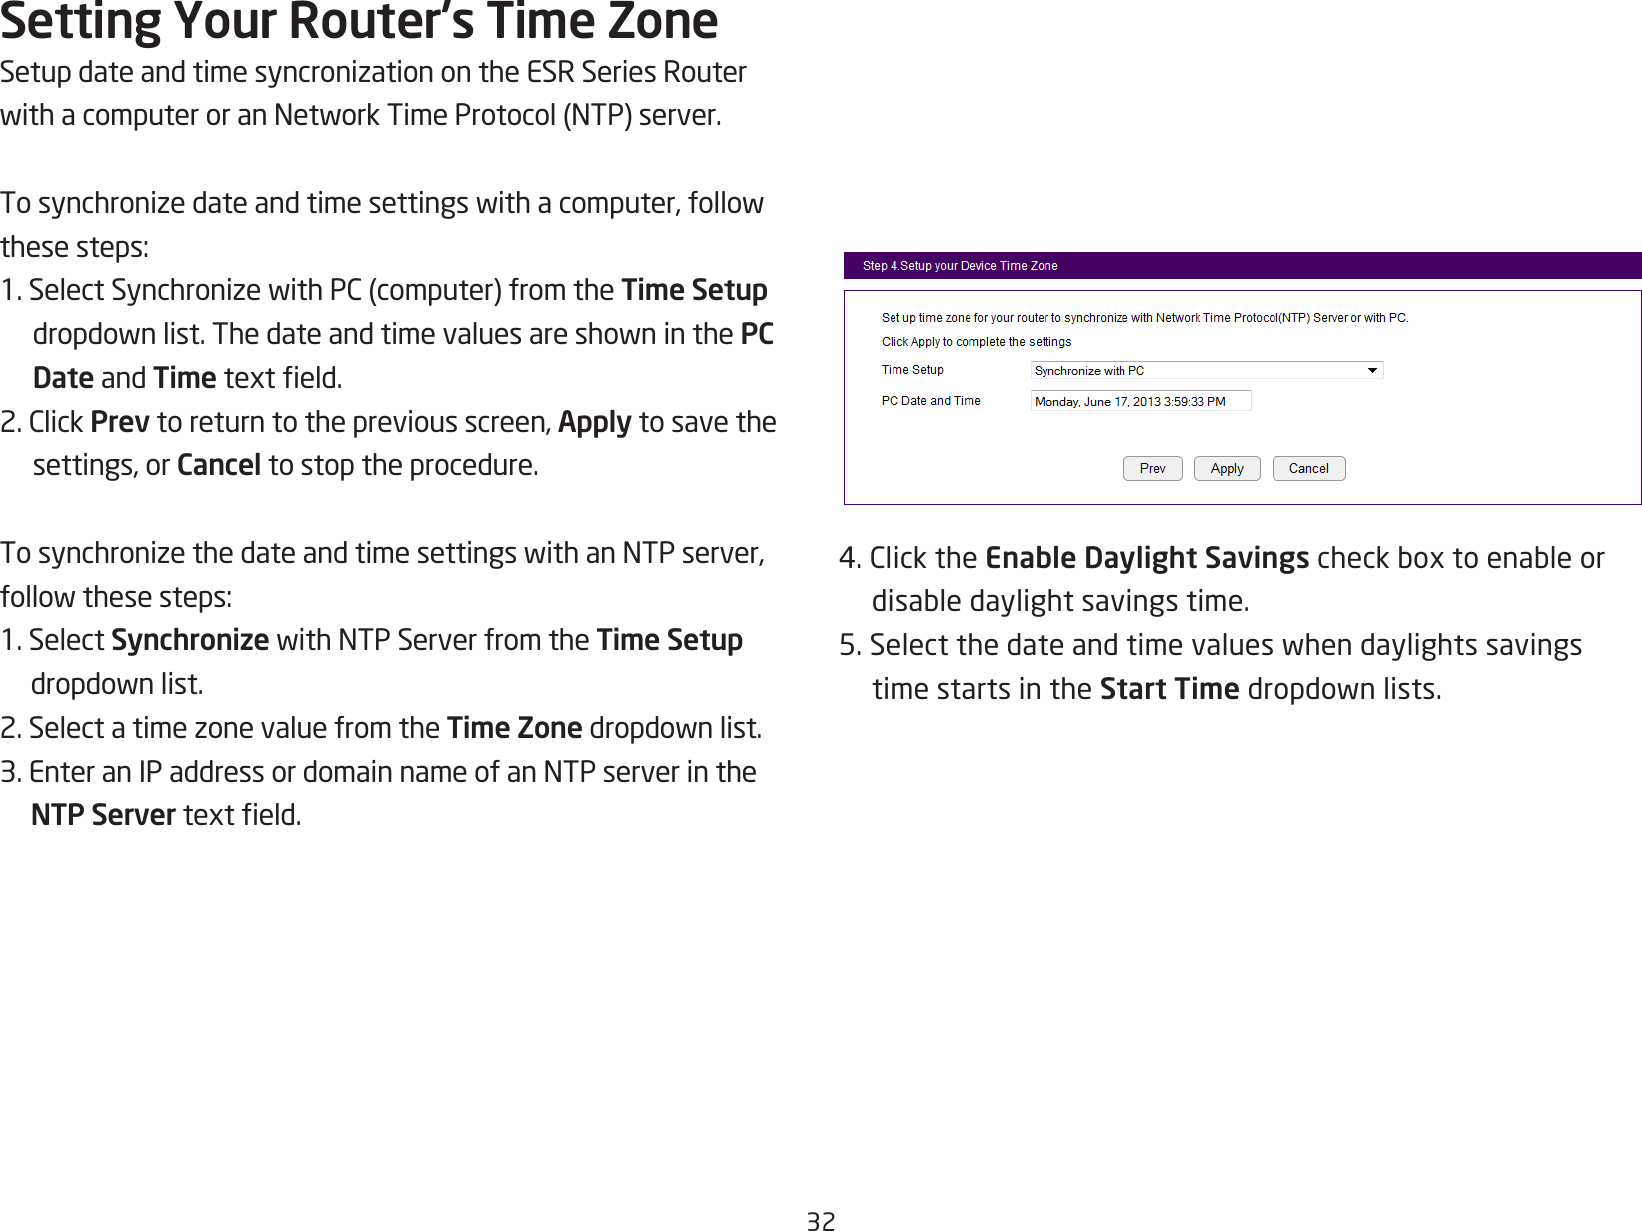 32Setting Your Router’s Time ZoneSetupdateandtimesyncronizationontheESRSeriesRouterwithacomputeroranNetworkTimeProtocol(NTP)server.Tosynchronizedateandtimesettingswithacomputer,followthesesteps:1.SelectSynchronizewithPC(computer)fromtheTime Setup dropdownlist.ThedateandtimevaluesareshowninthePC Date and Timetexteld.2.ClickPrev to return to the previous screen, Apply to save the settings, or Cancel to stop the procedure.TosynchronizethedateandtimesettingswithanNTPserver,followthesesteps:1. Select SynchronizewithNTPServerfromtheTime Setup dropdownlist.2.SelectatimezonevaluefromtheTime Zonedropdownlist.3.EnteranIPaddressordomainnameofanNTPserverintheNTP Servertexteld.4.ClicktheEnable Daylight Savingscheckboxtoenableordisabledaylightsavingstime.5.Selectthedateandtimevalueswhendaylightssavingstime starts in the Start Timedropdownlists.